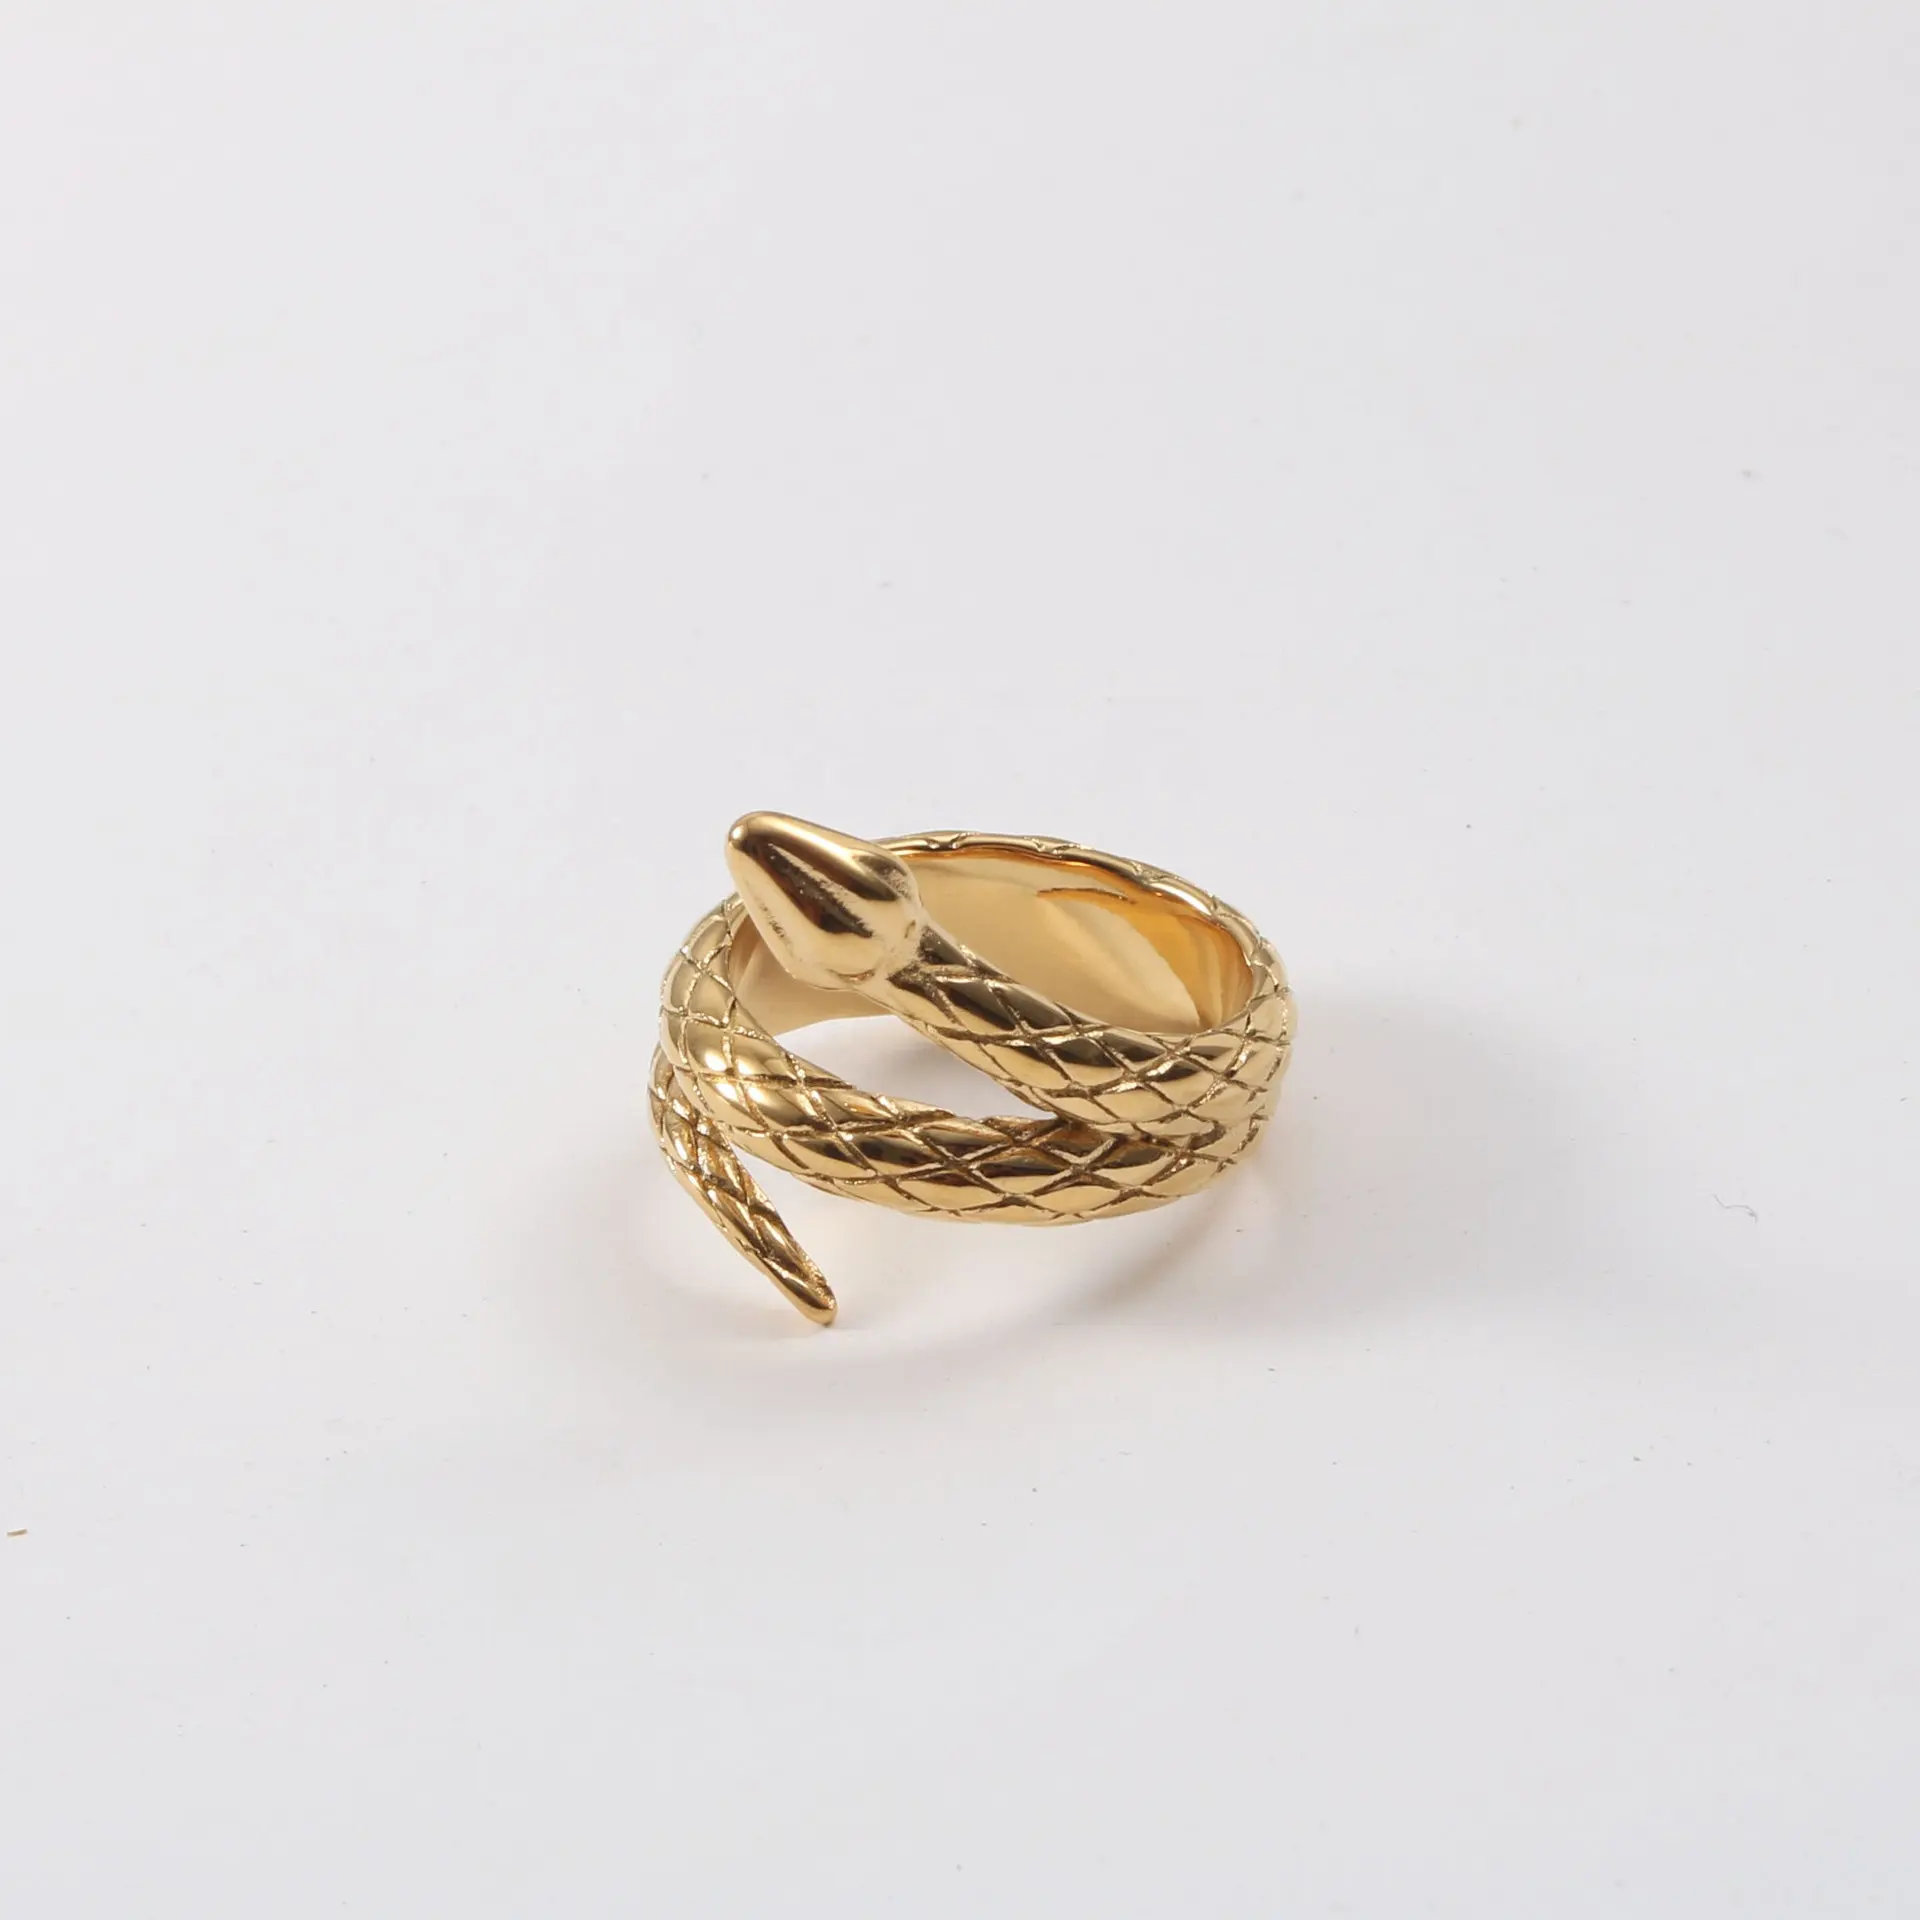 Snake Ring Images Embossed Jewelry Hot Wholesale Jewelry Gold Plated Mans Rings Vintage Snake Rings Woman